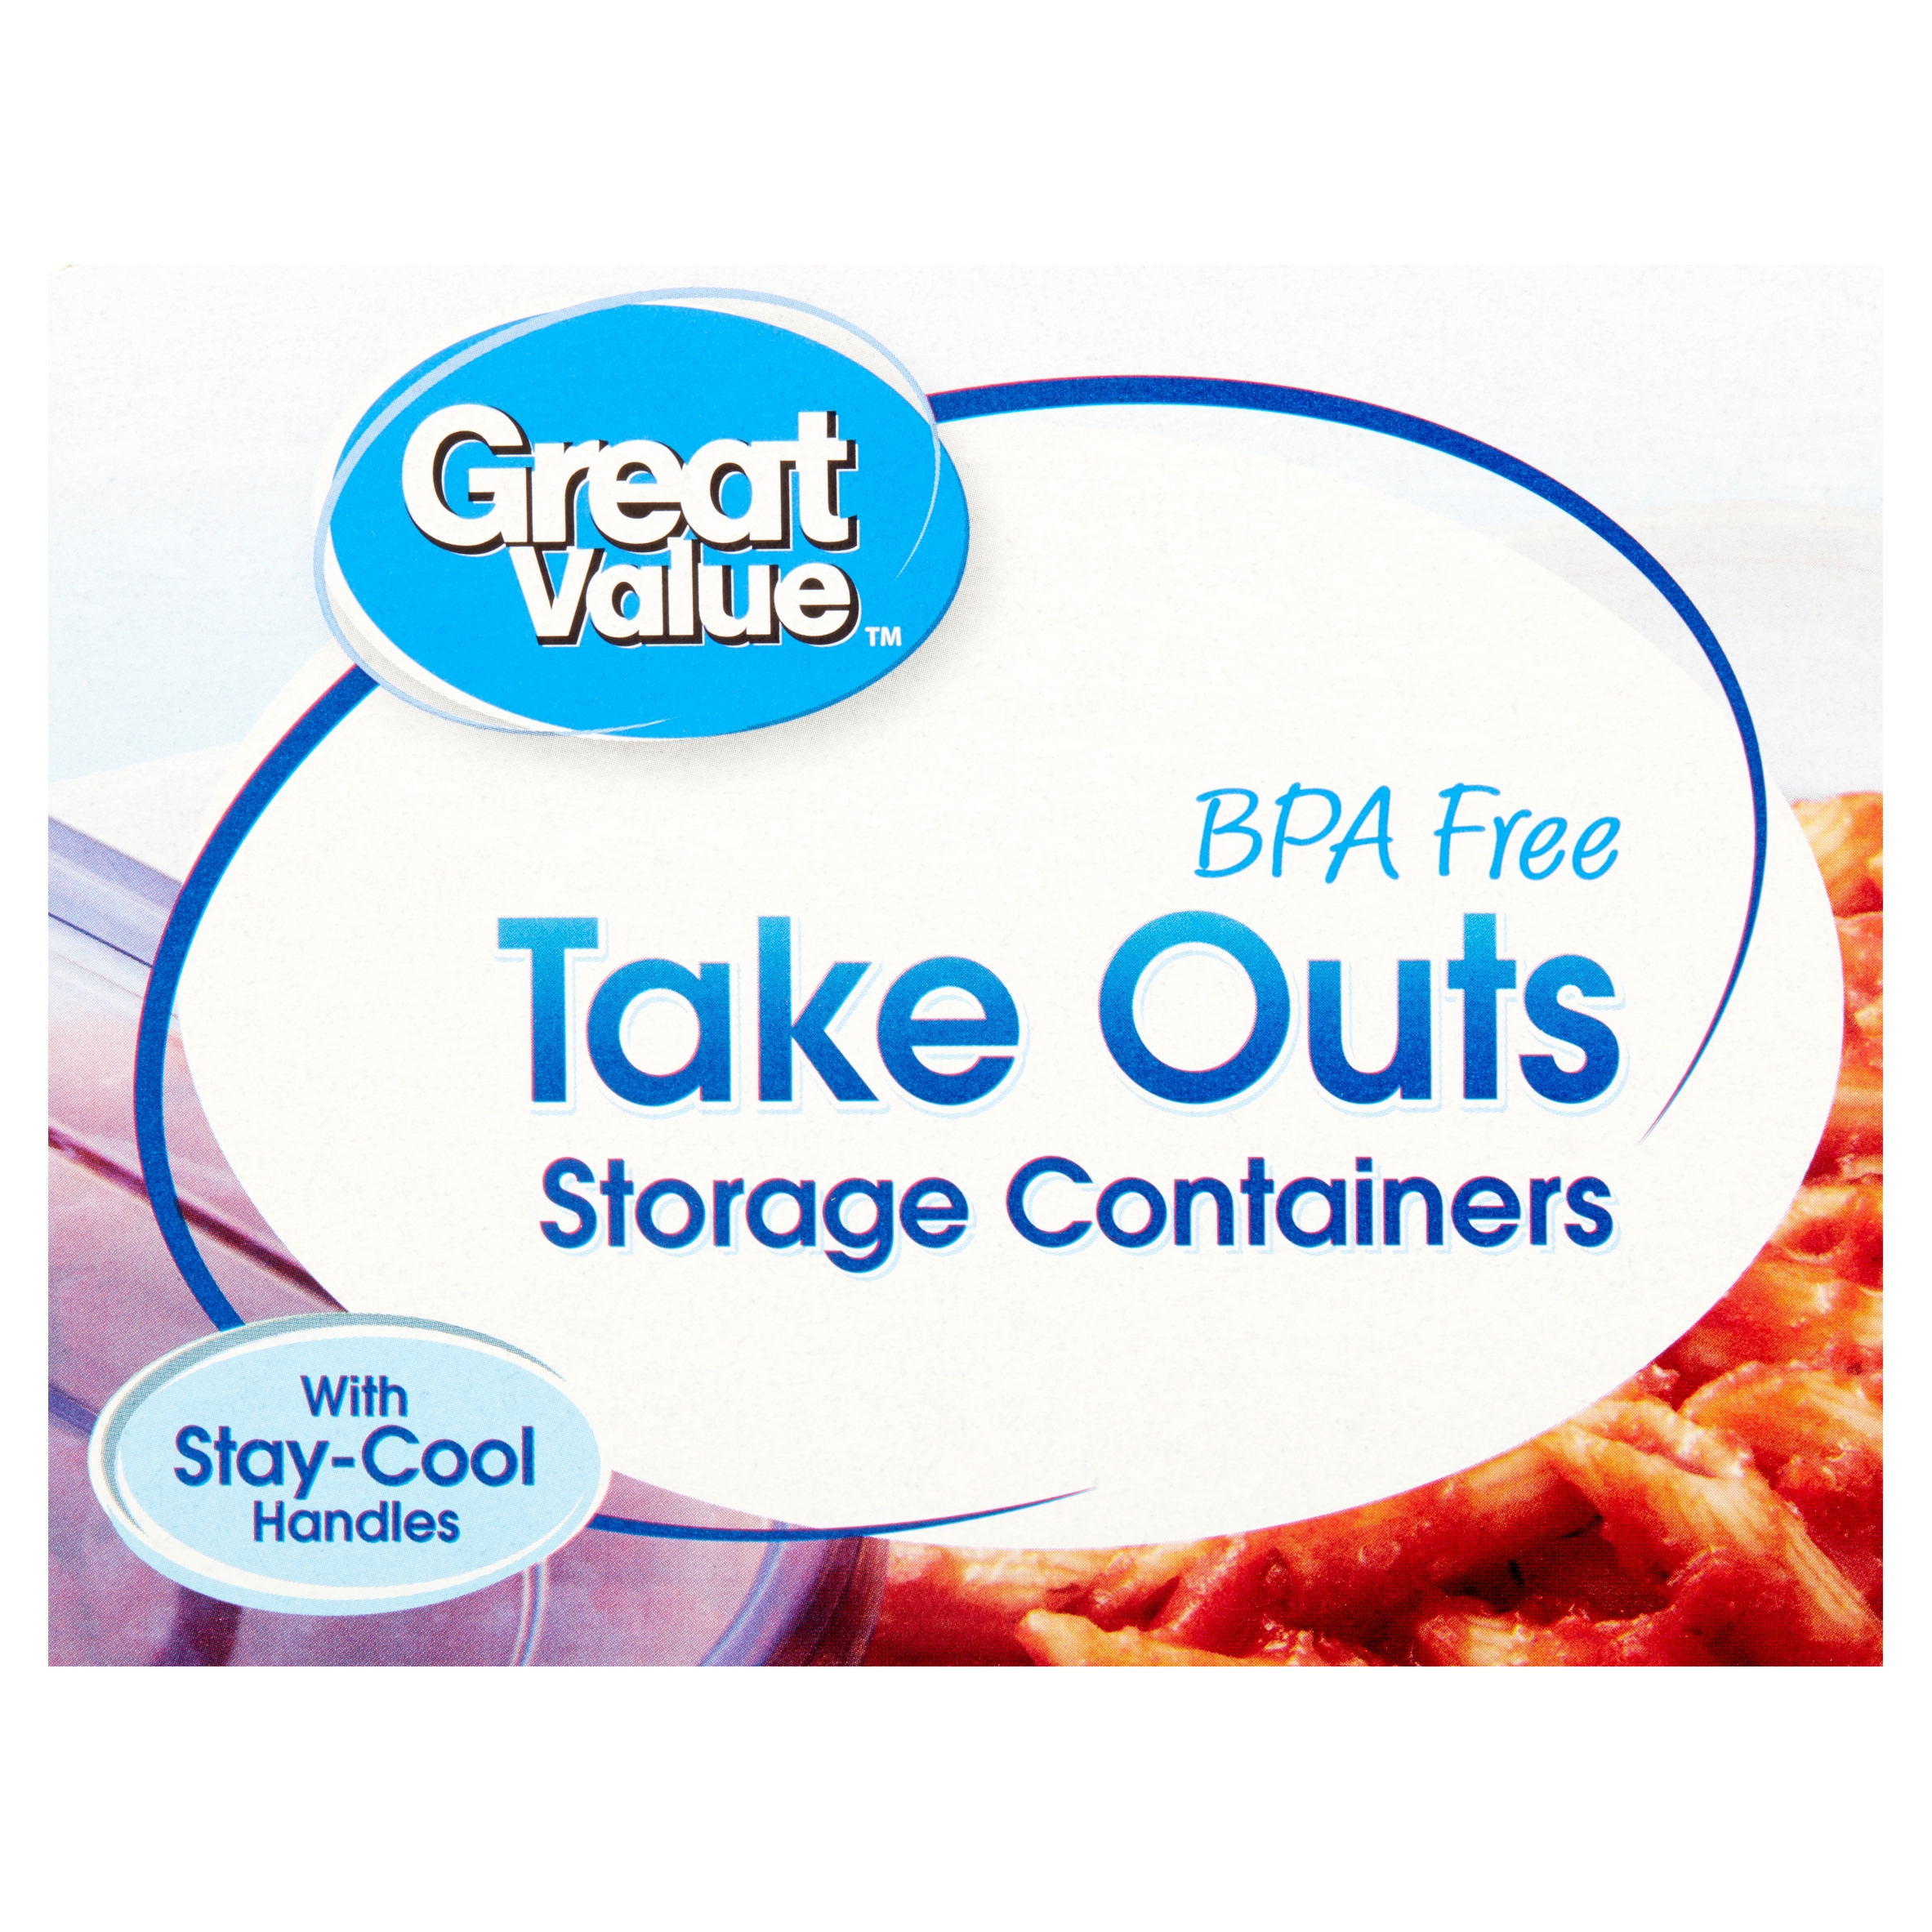 Great Value Take Outs 32 fl oz Storage Container, 4 count - image 4 of 9